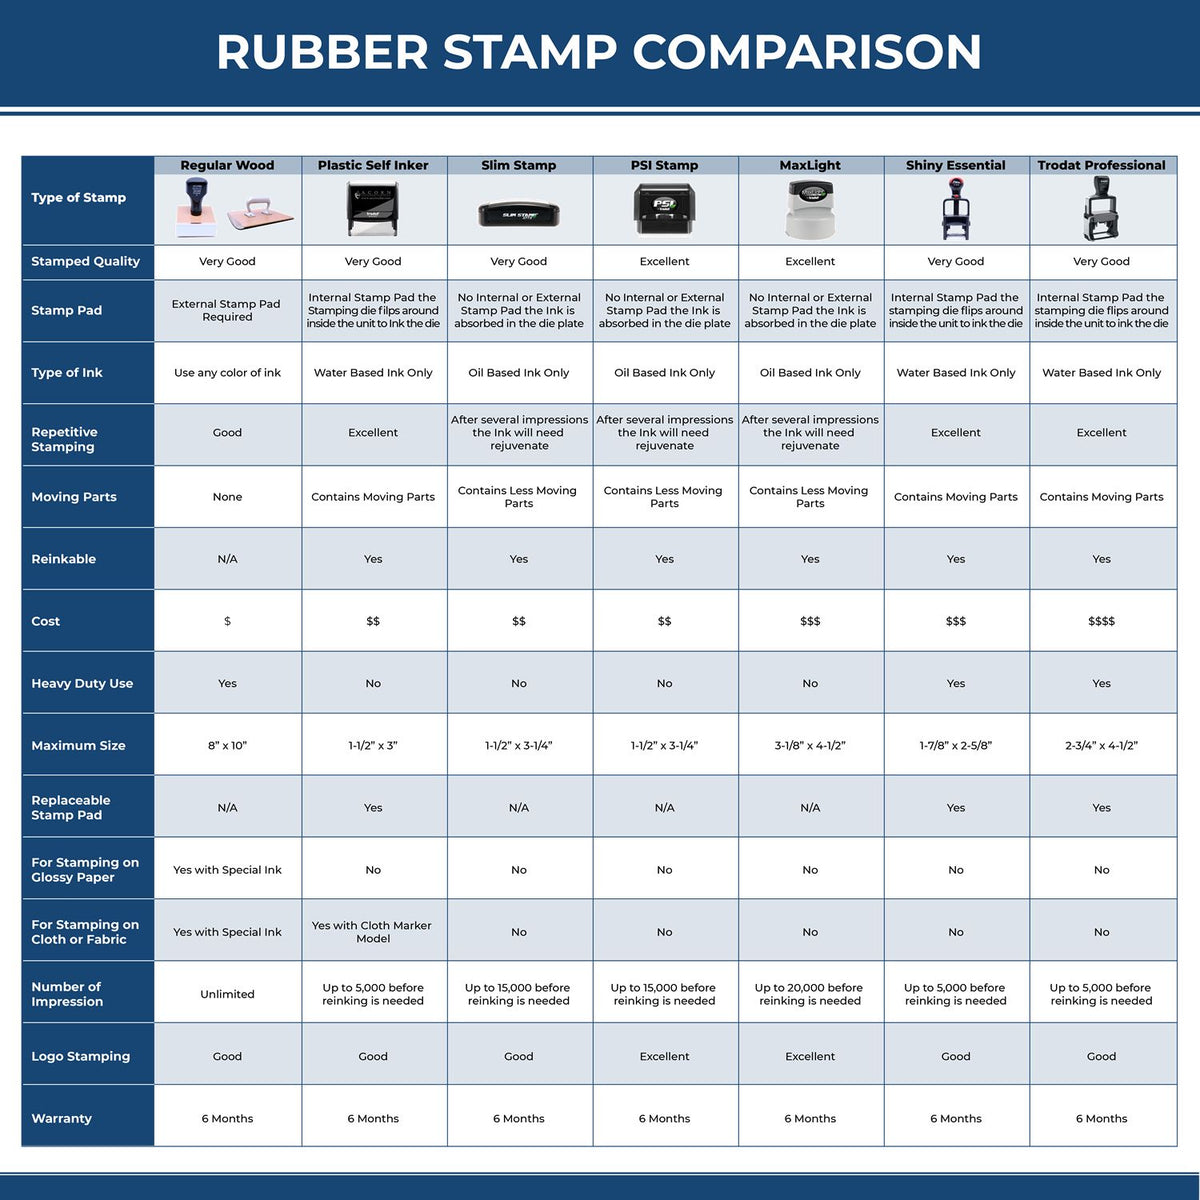 Express Mail International Rubber Stamp 4092R Rubber Stamp Comparison